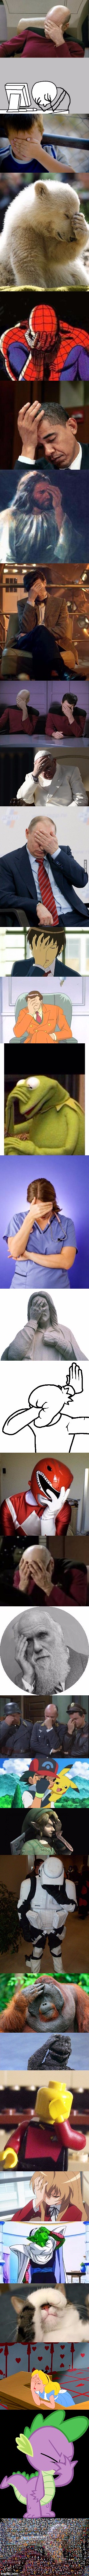 High Quality The Epic Facepalm Blank Meme Template